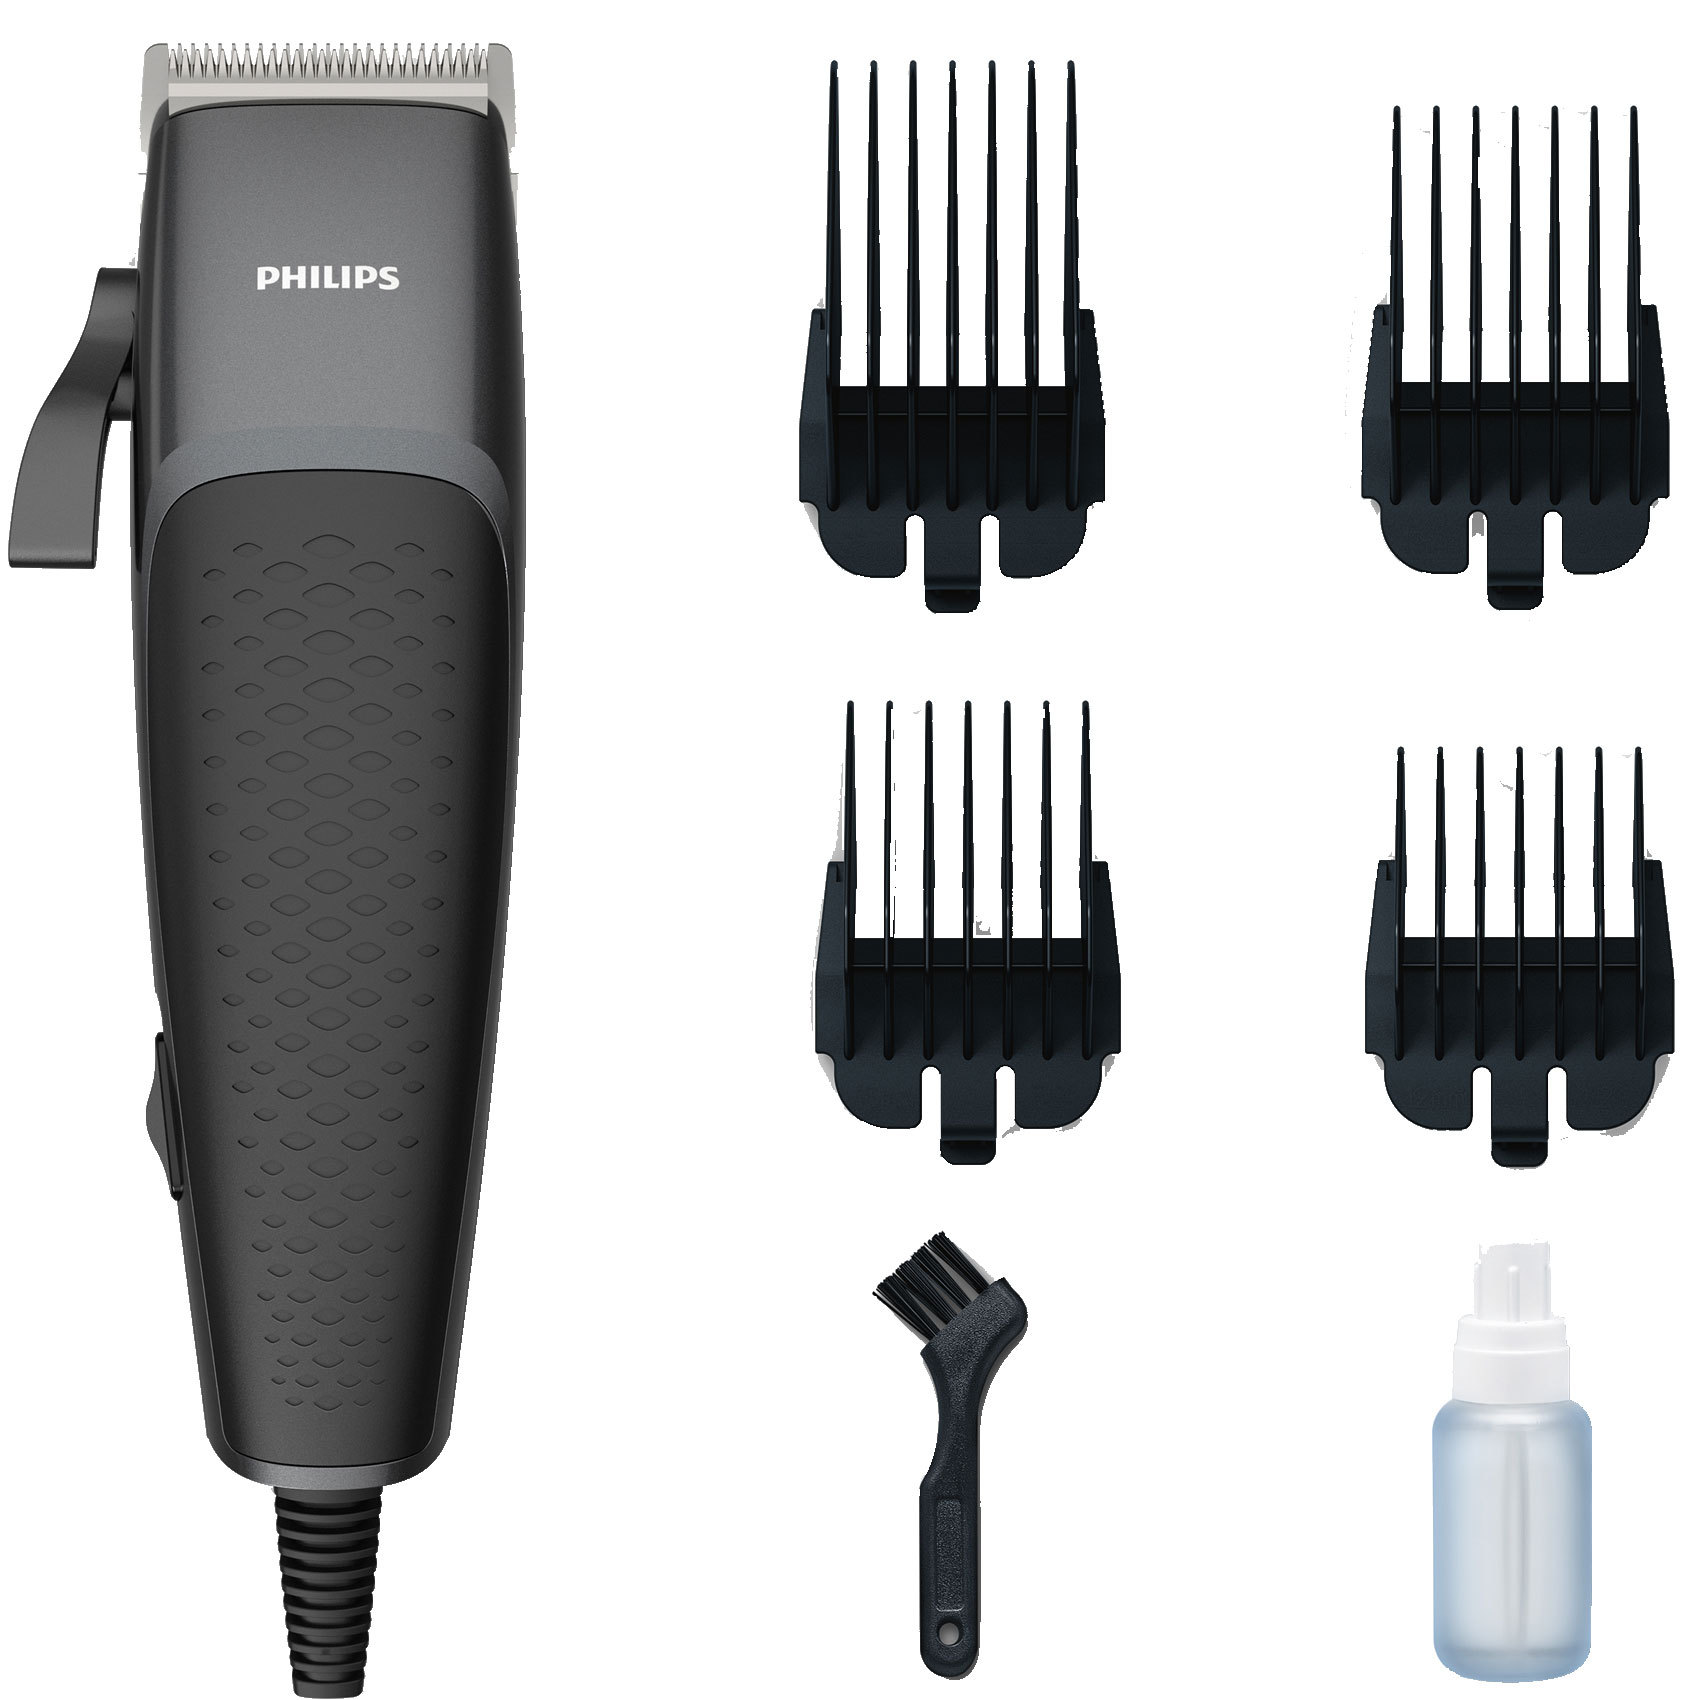 philips haircutter